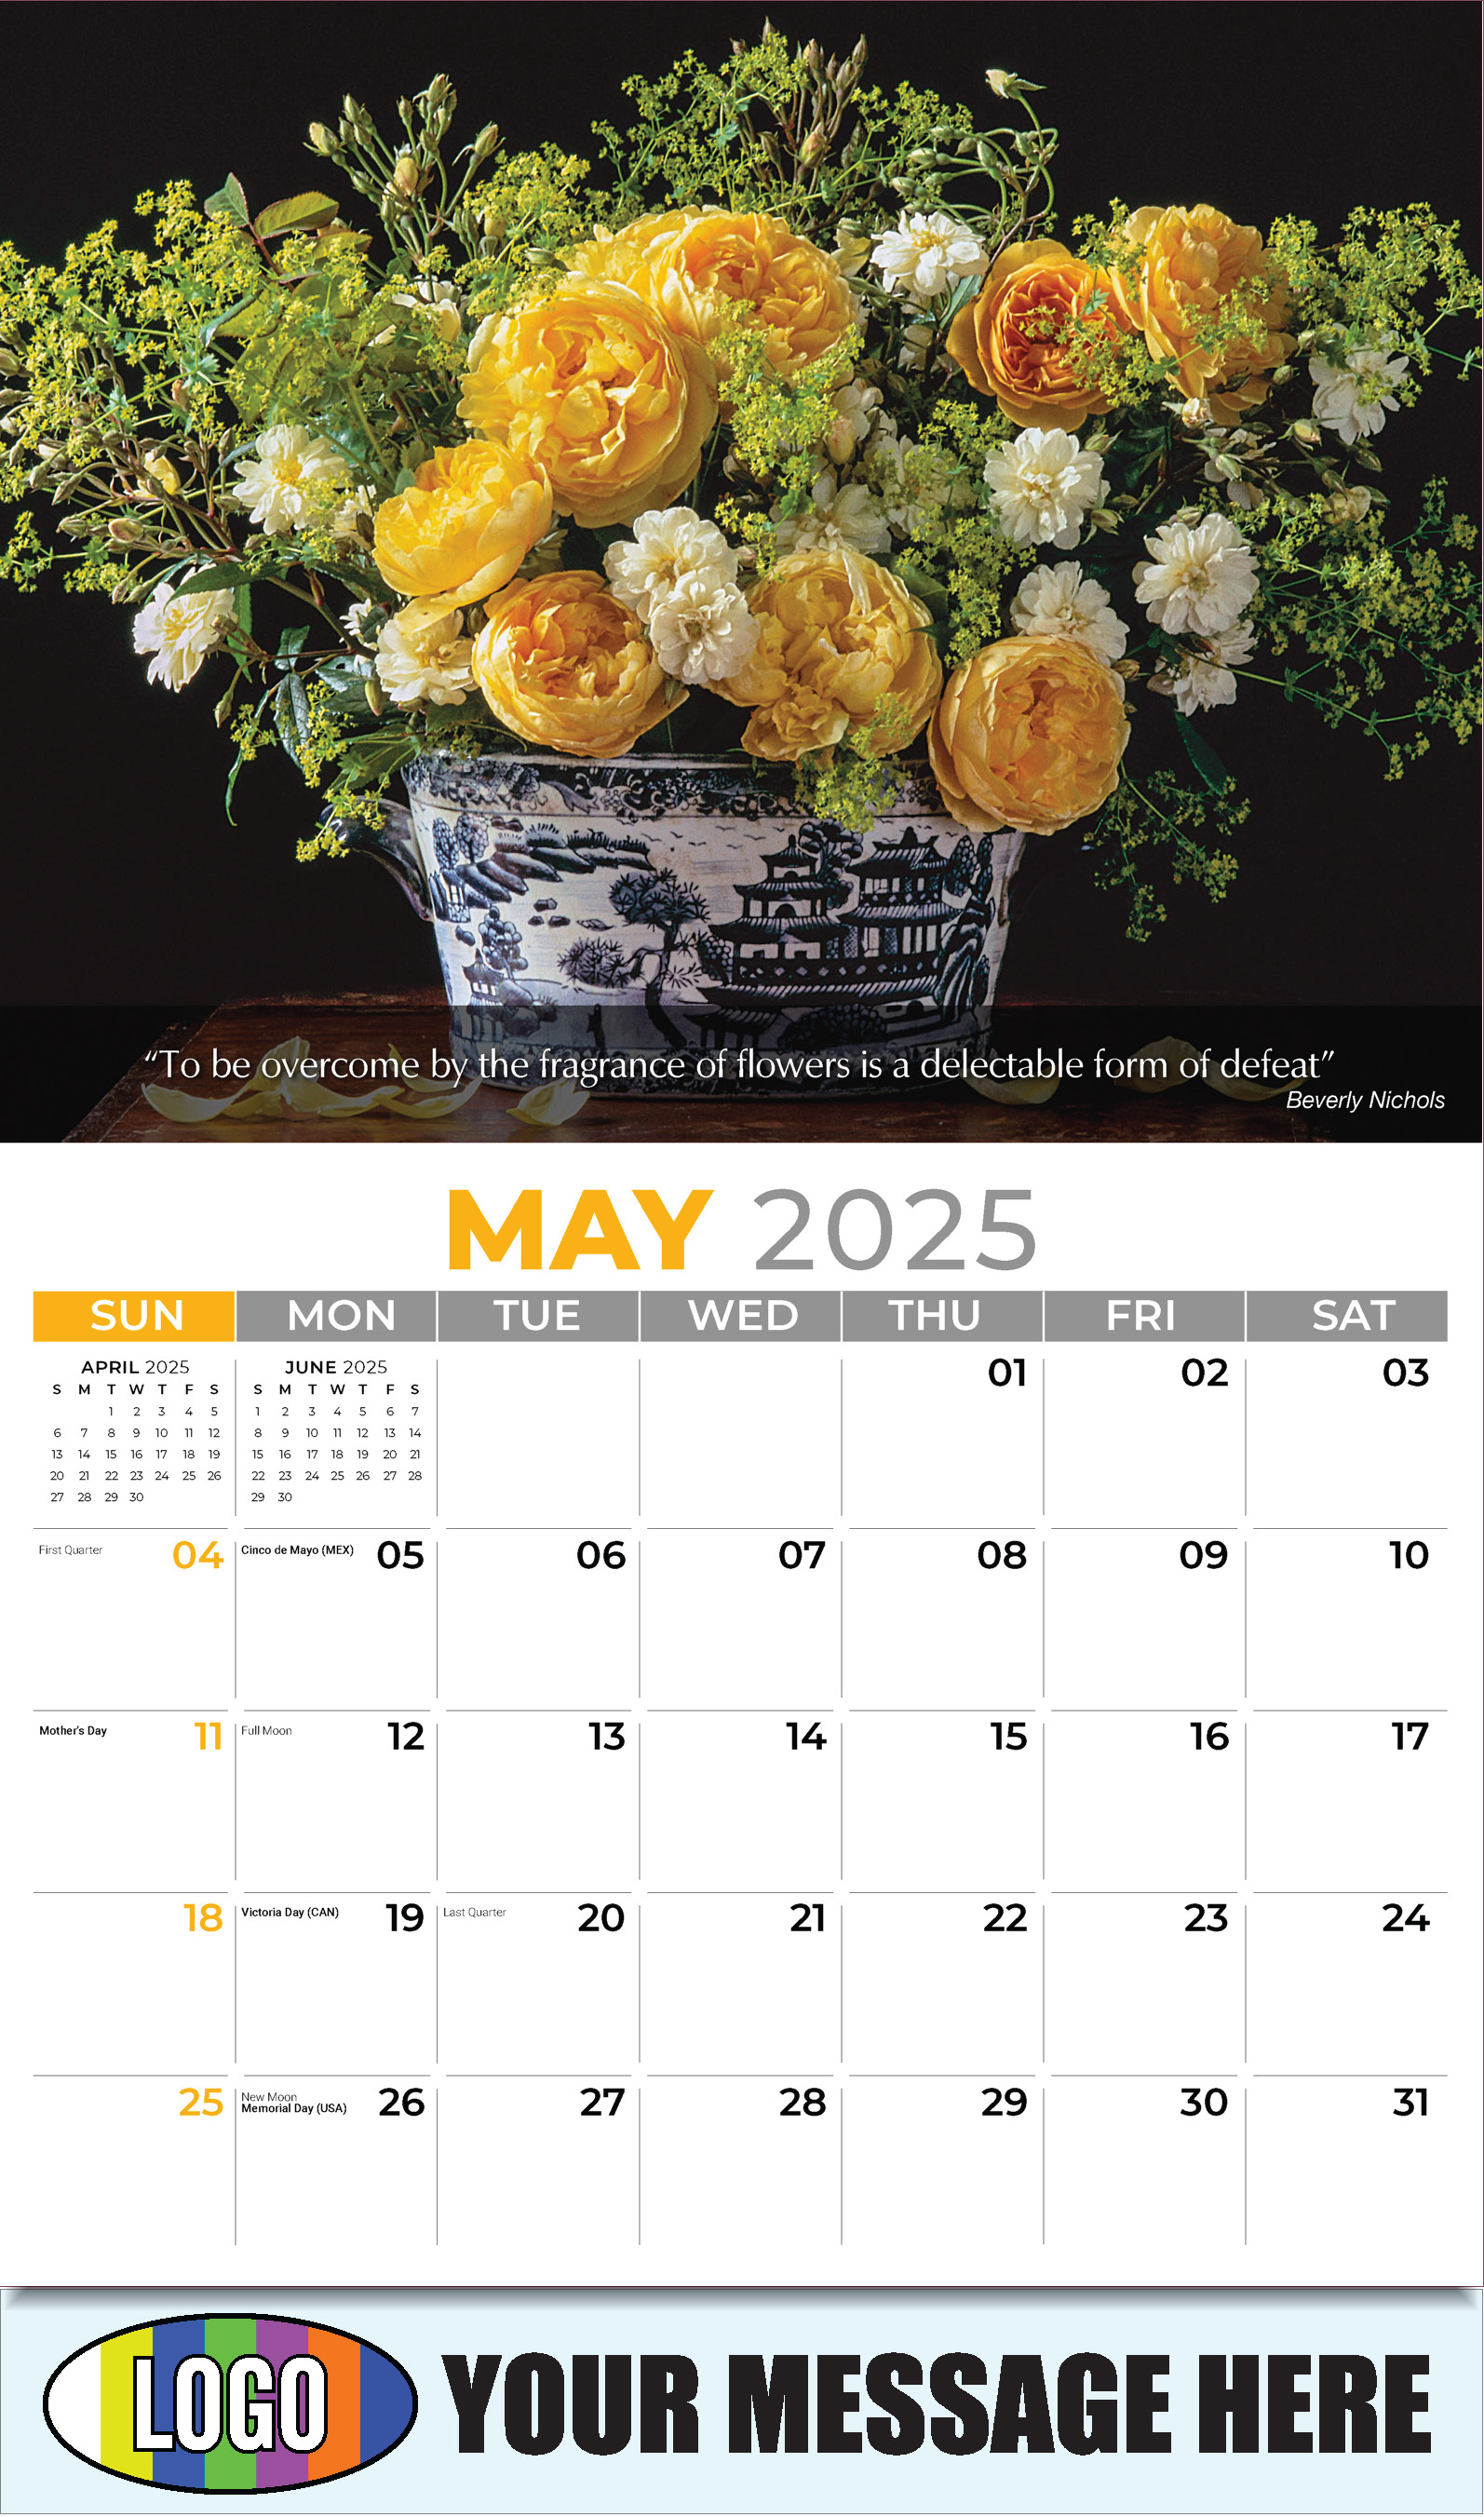 Flowers and Gardens 2025 Business Advertising Calendar - May